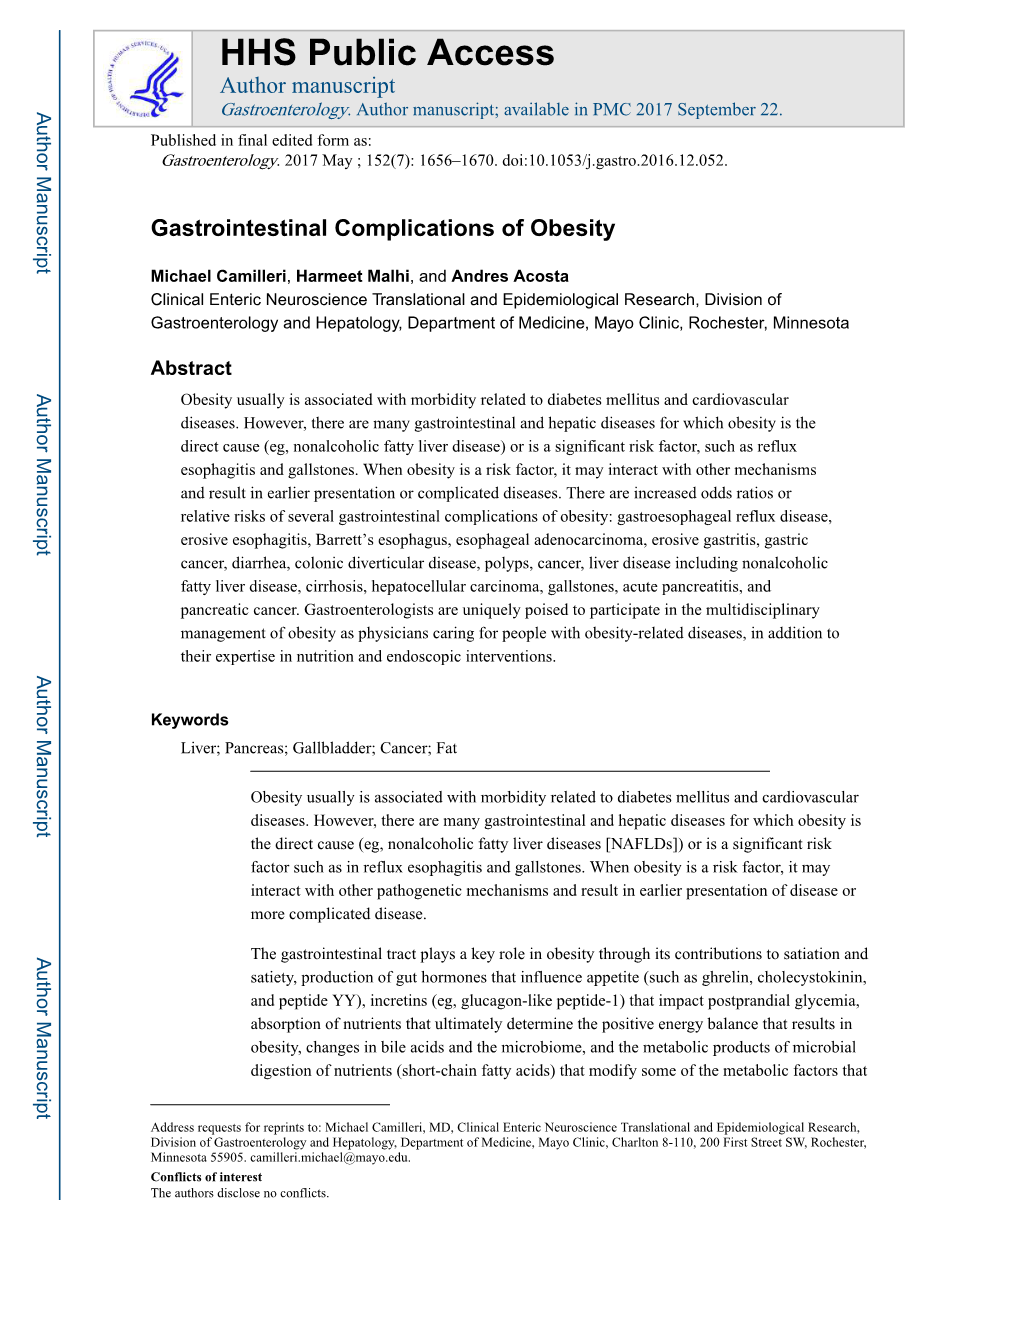 Gastrointestinal Complications of Obesity